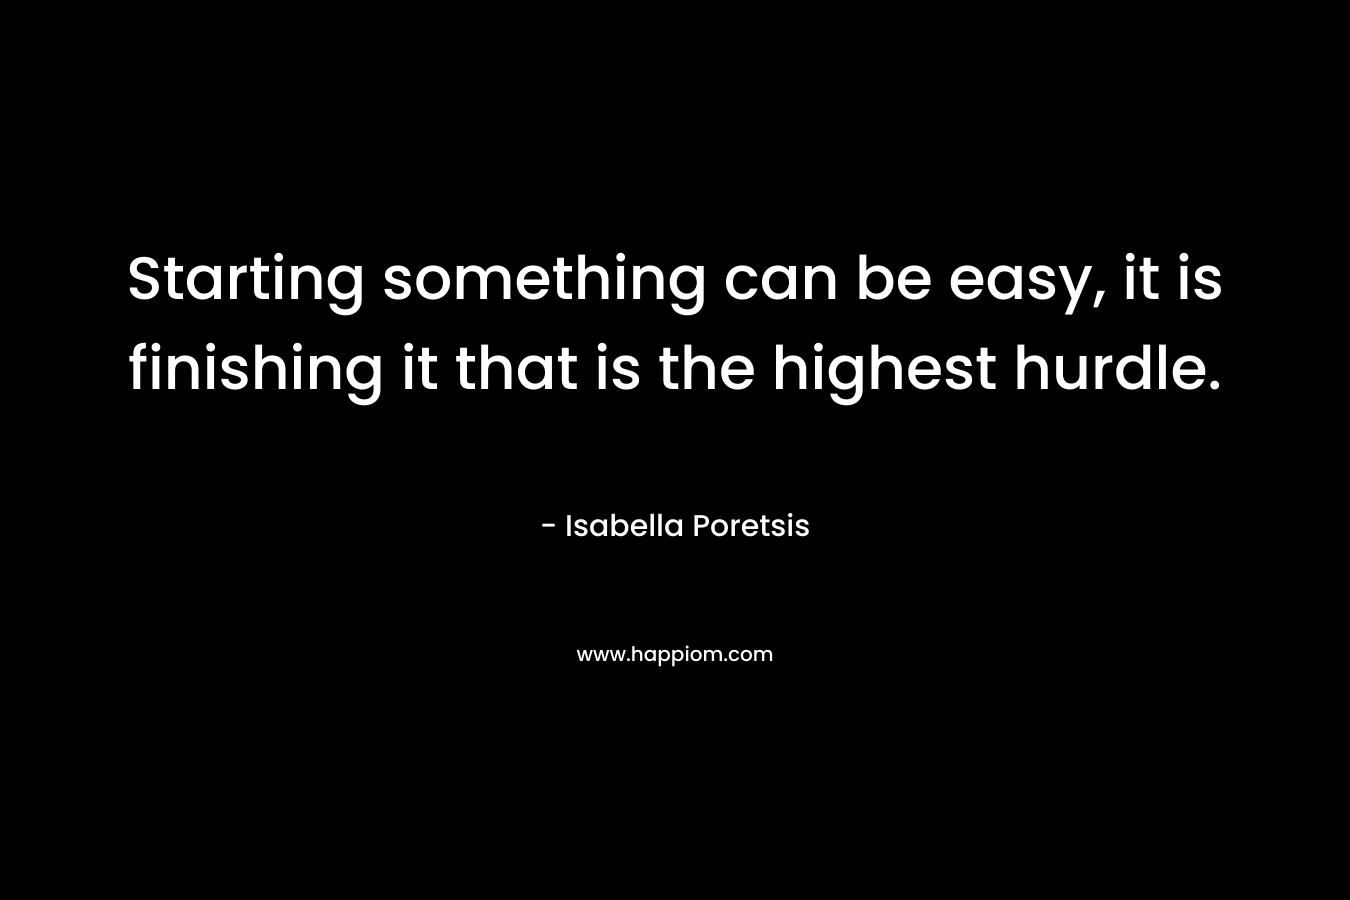 Starting something can be easy, it is finishing it that is the highest hurdle.